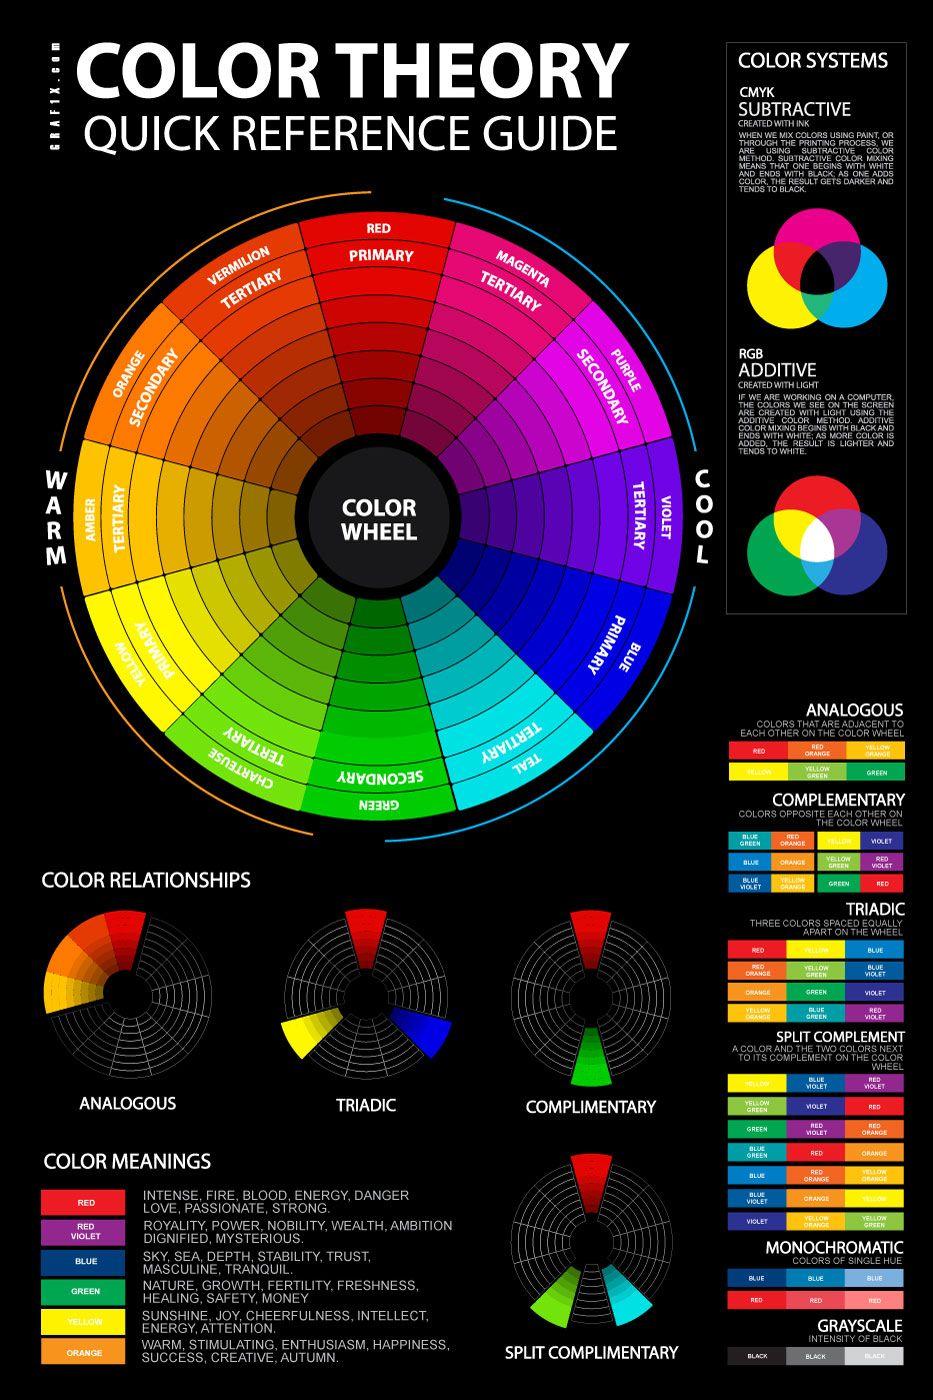 Blue Green Yellow Red Logo - Color Meaning and Psychology of Red, Blue, Green, Yellow, Orange ...